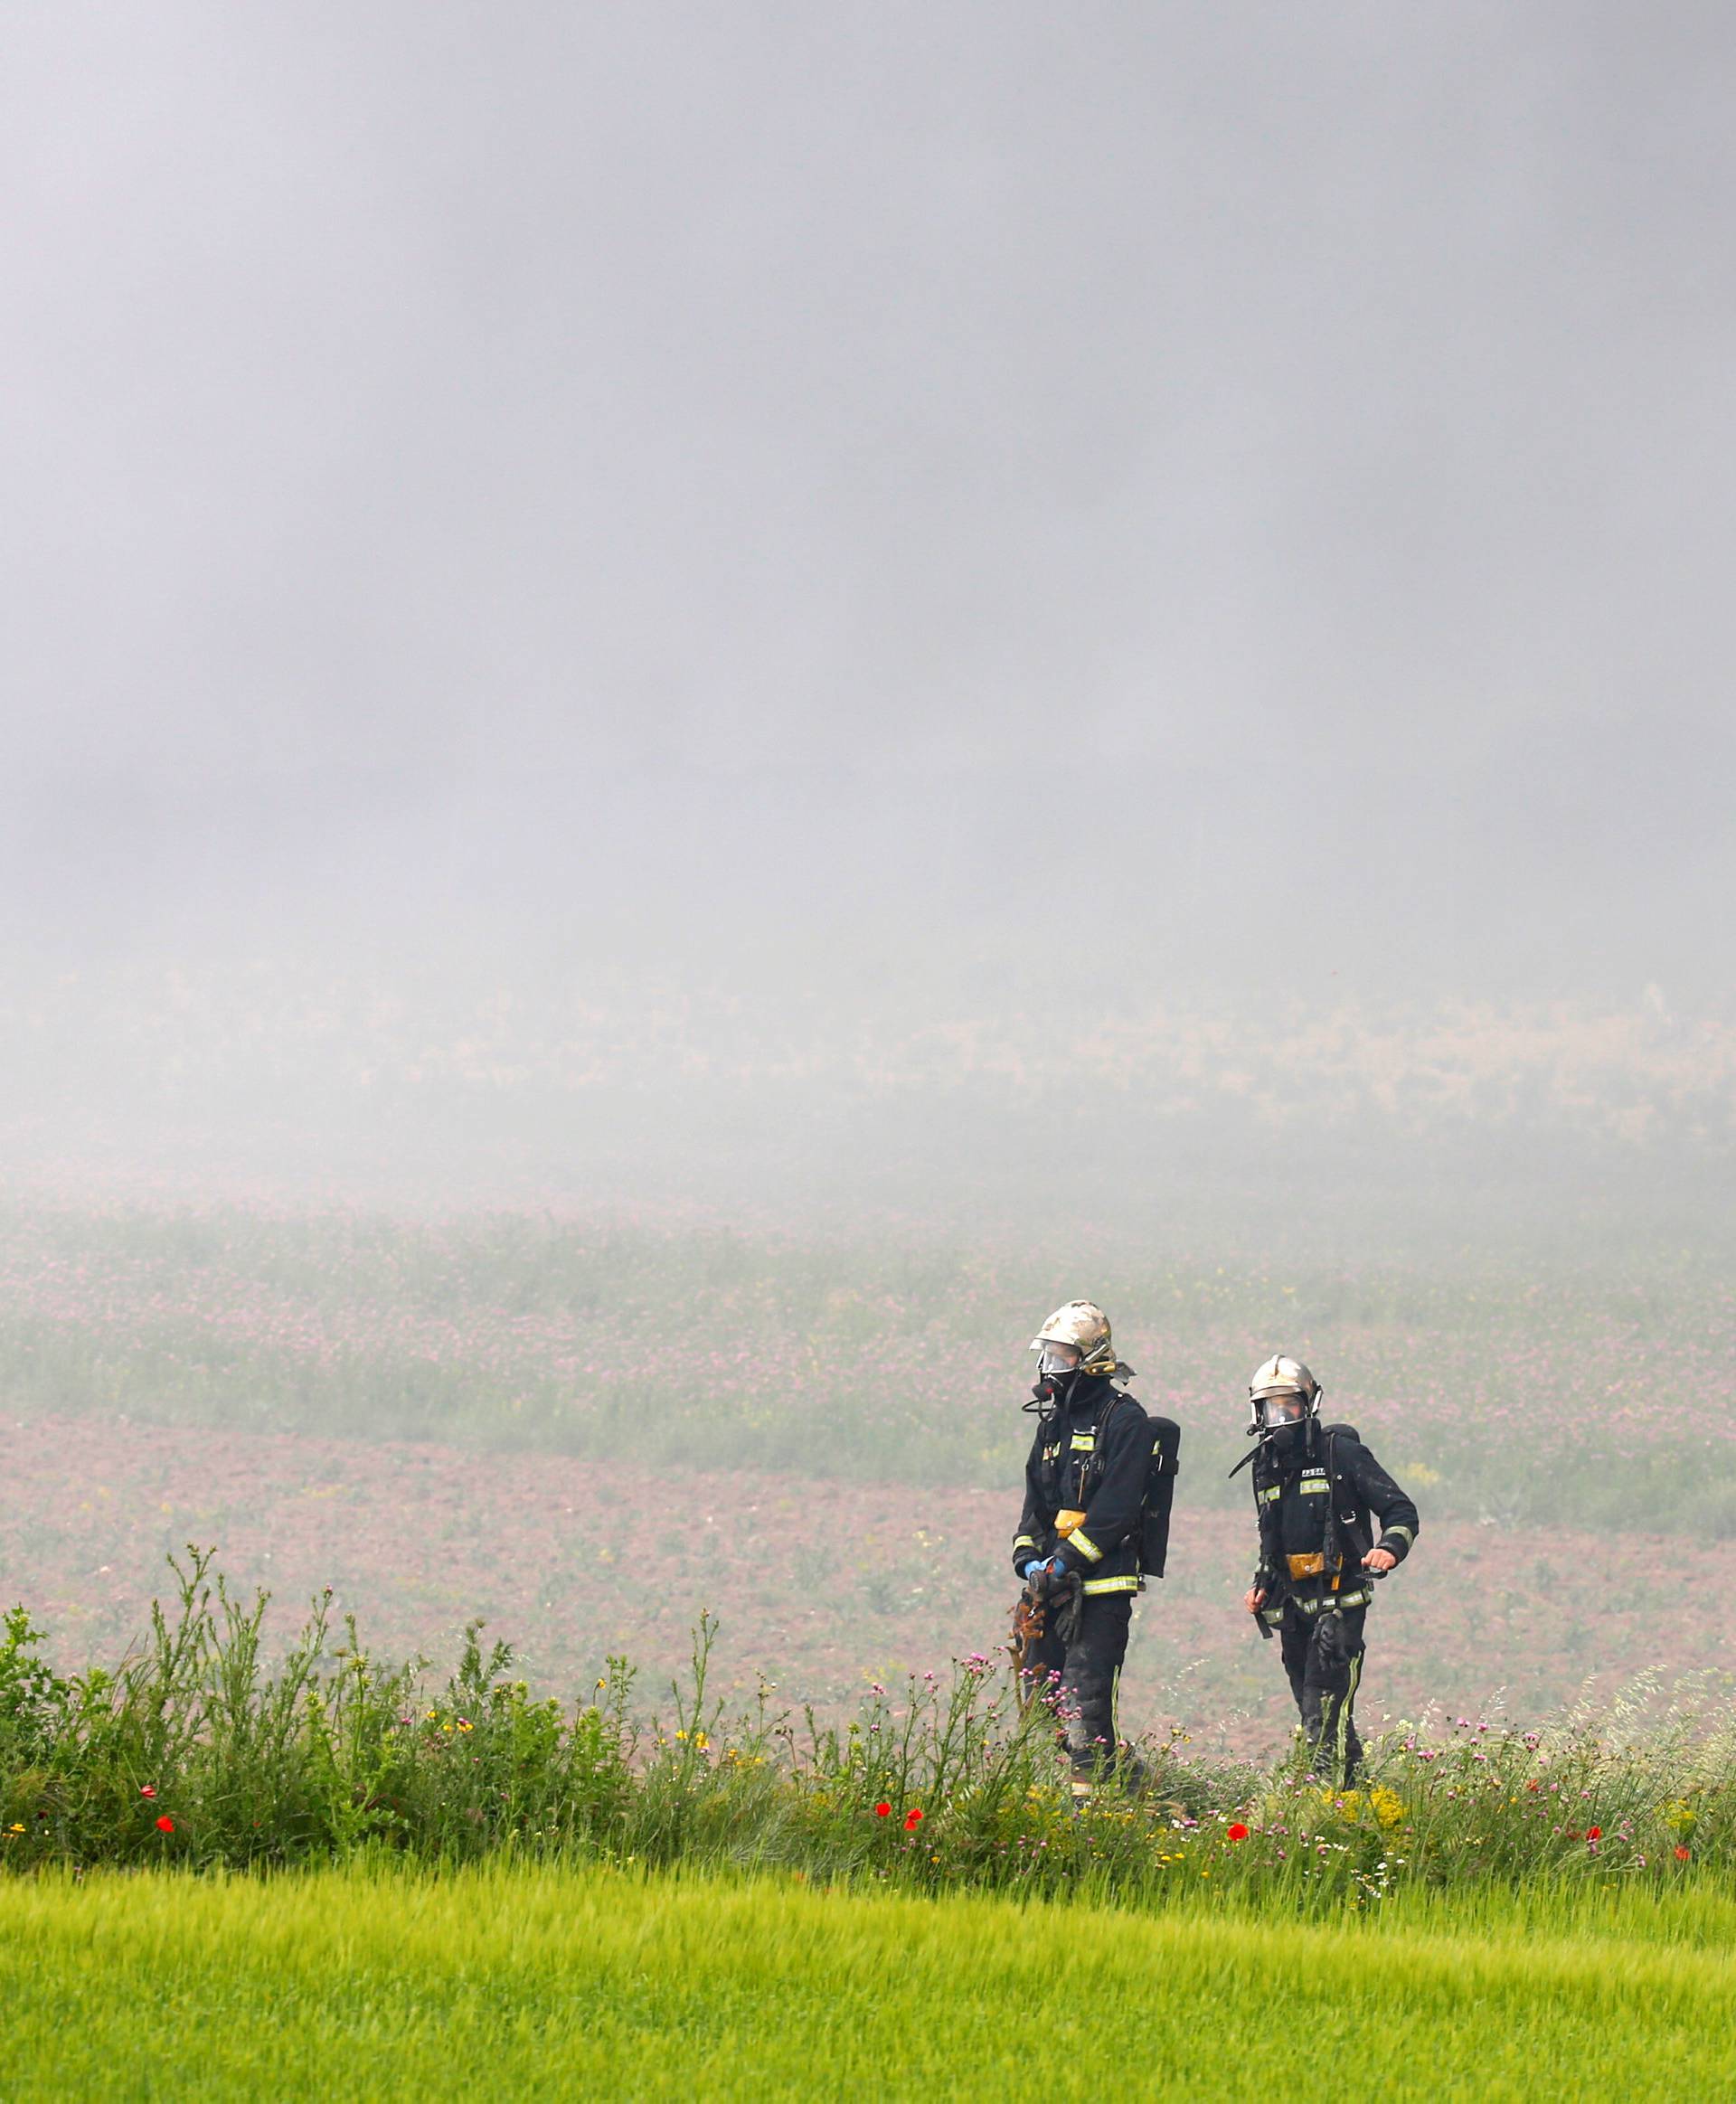 Firefigthers walk amidst smoke during a fire at a tire dump near a residential development in Sesena